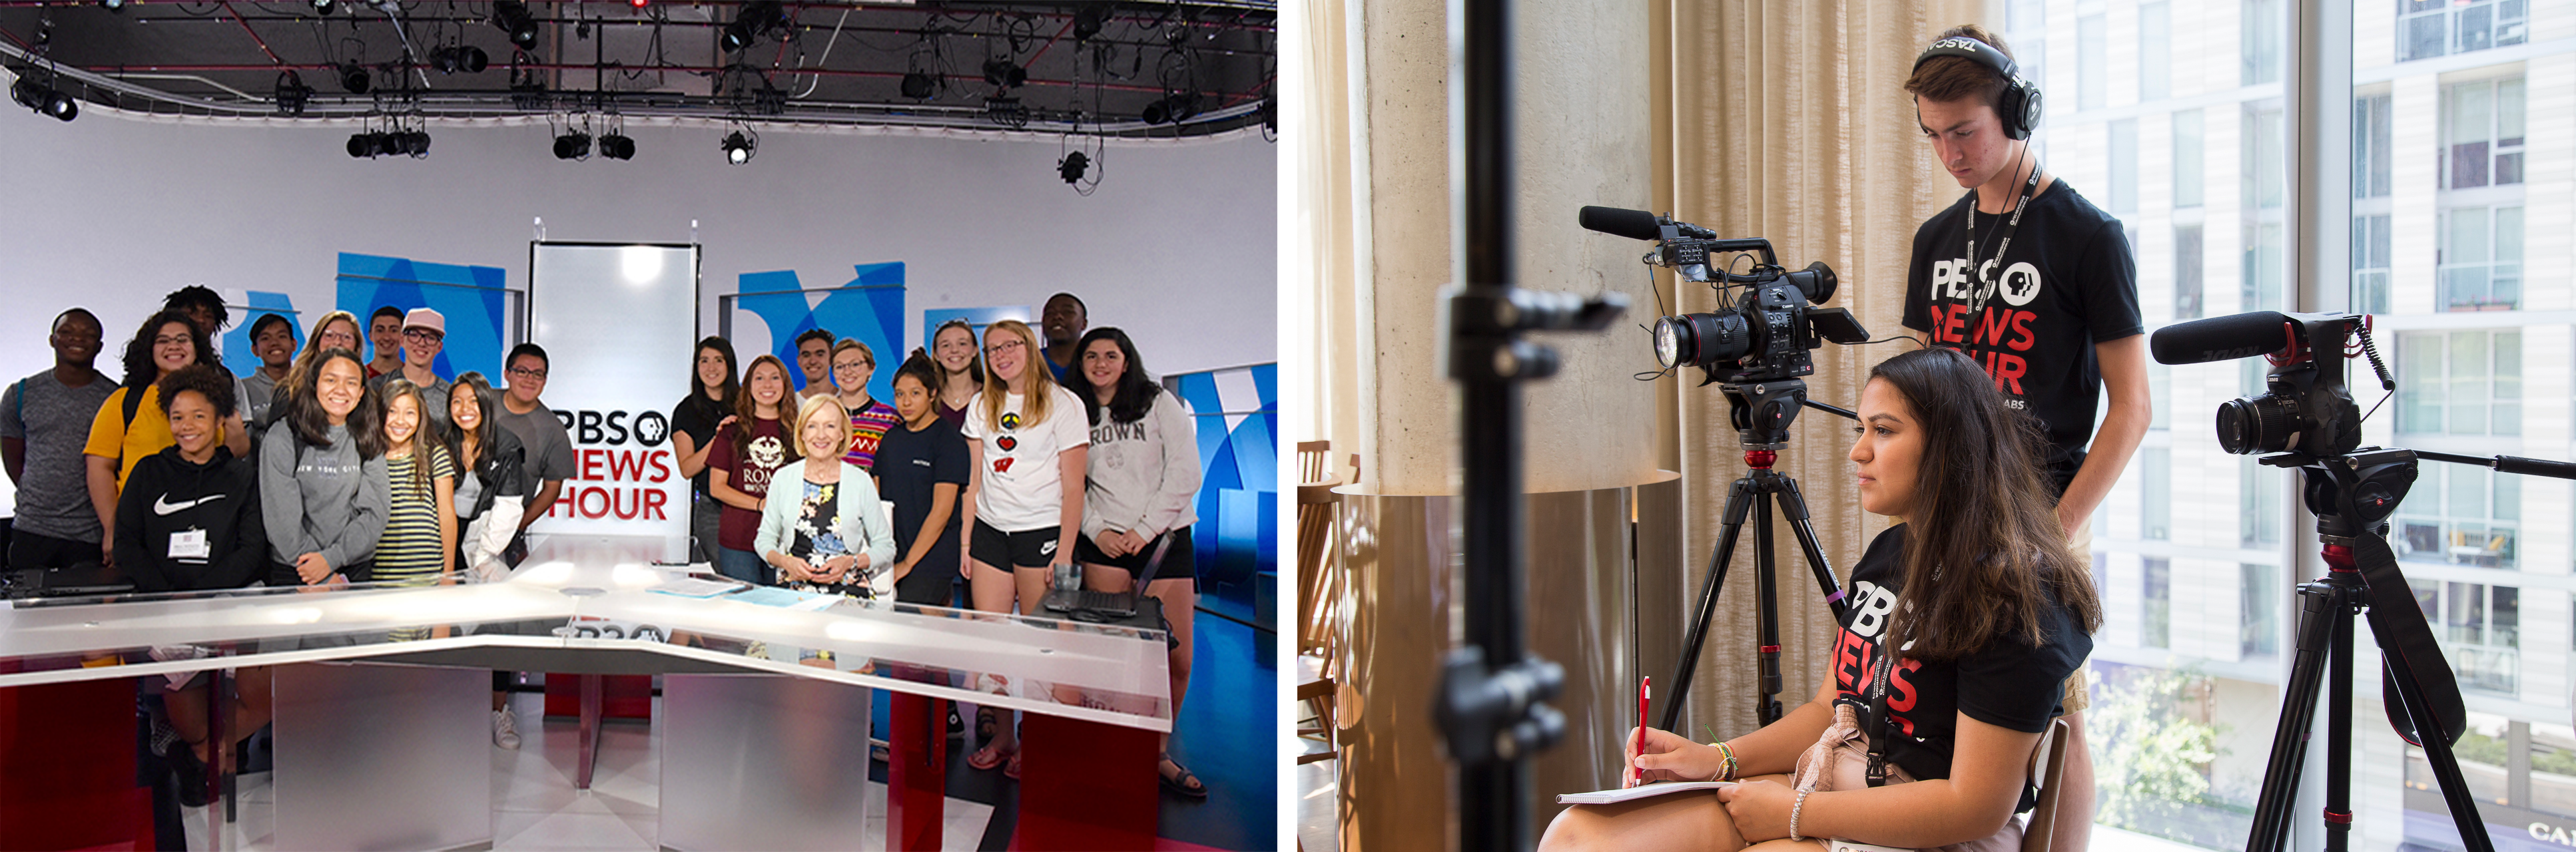 Images of students working for PBS Newshour